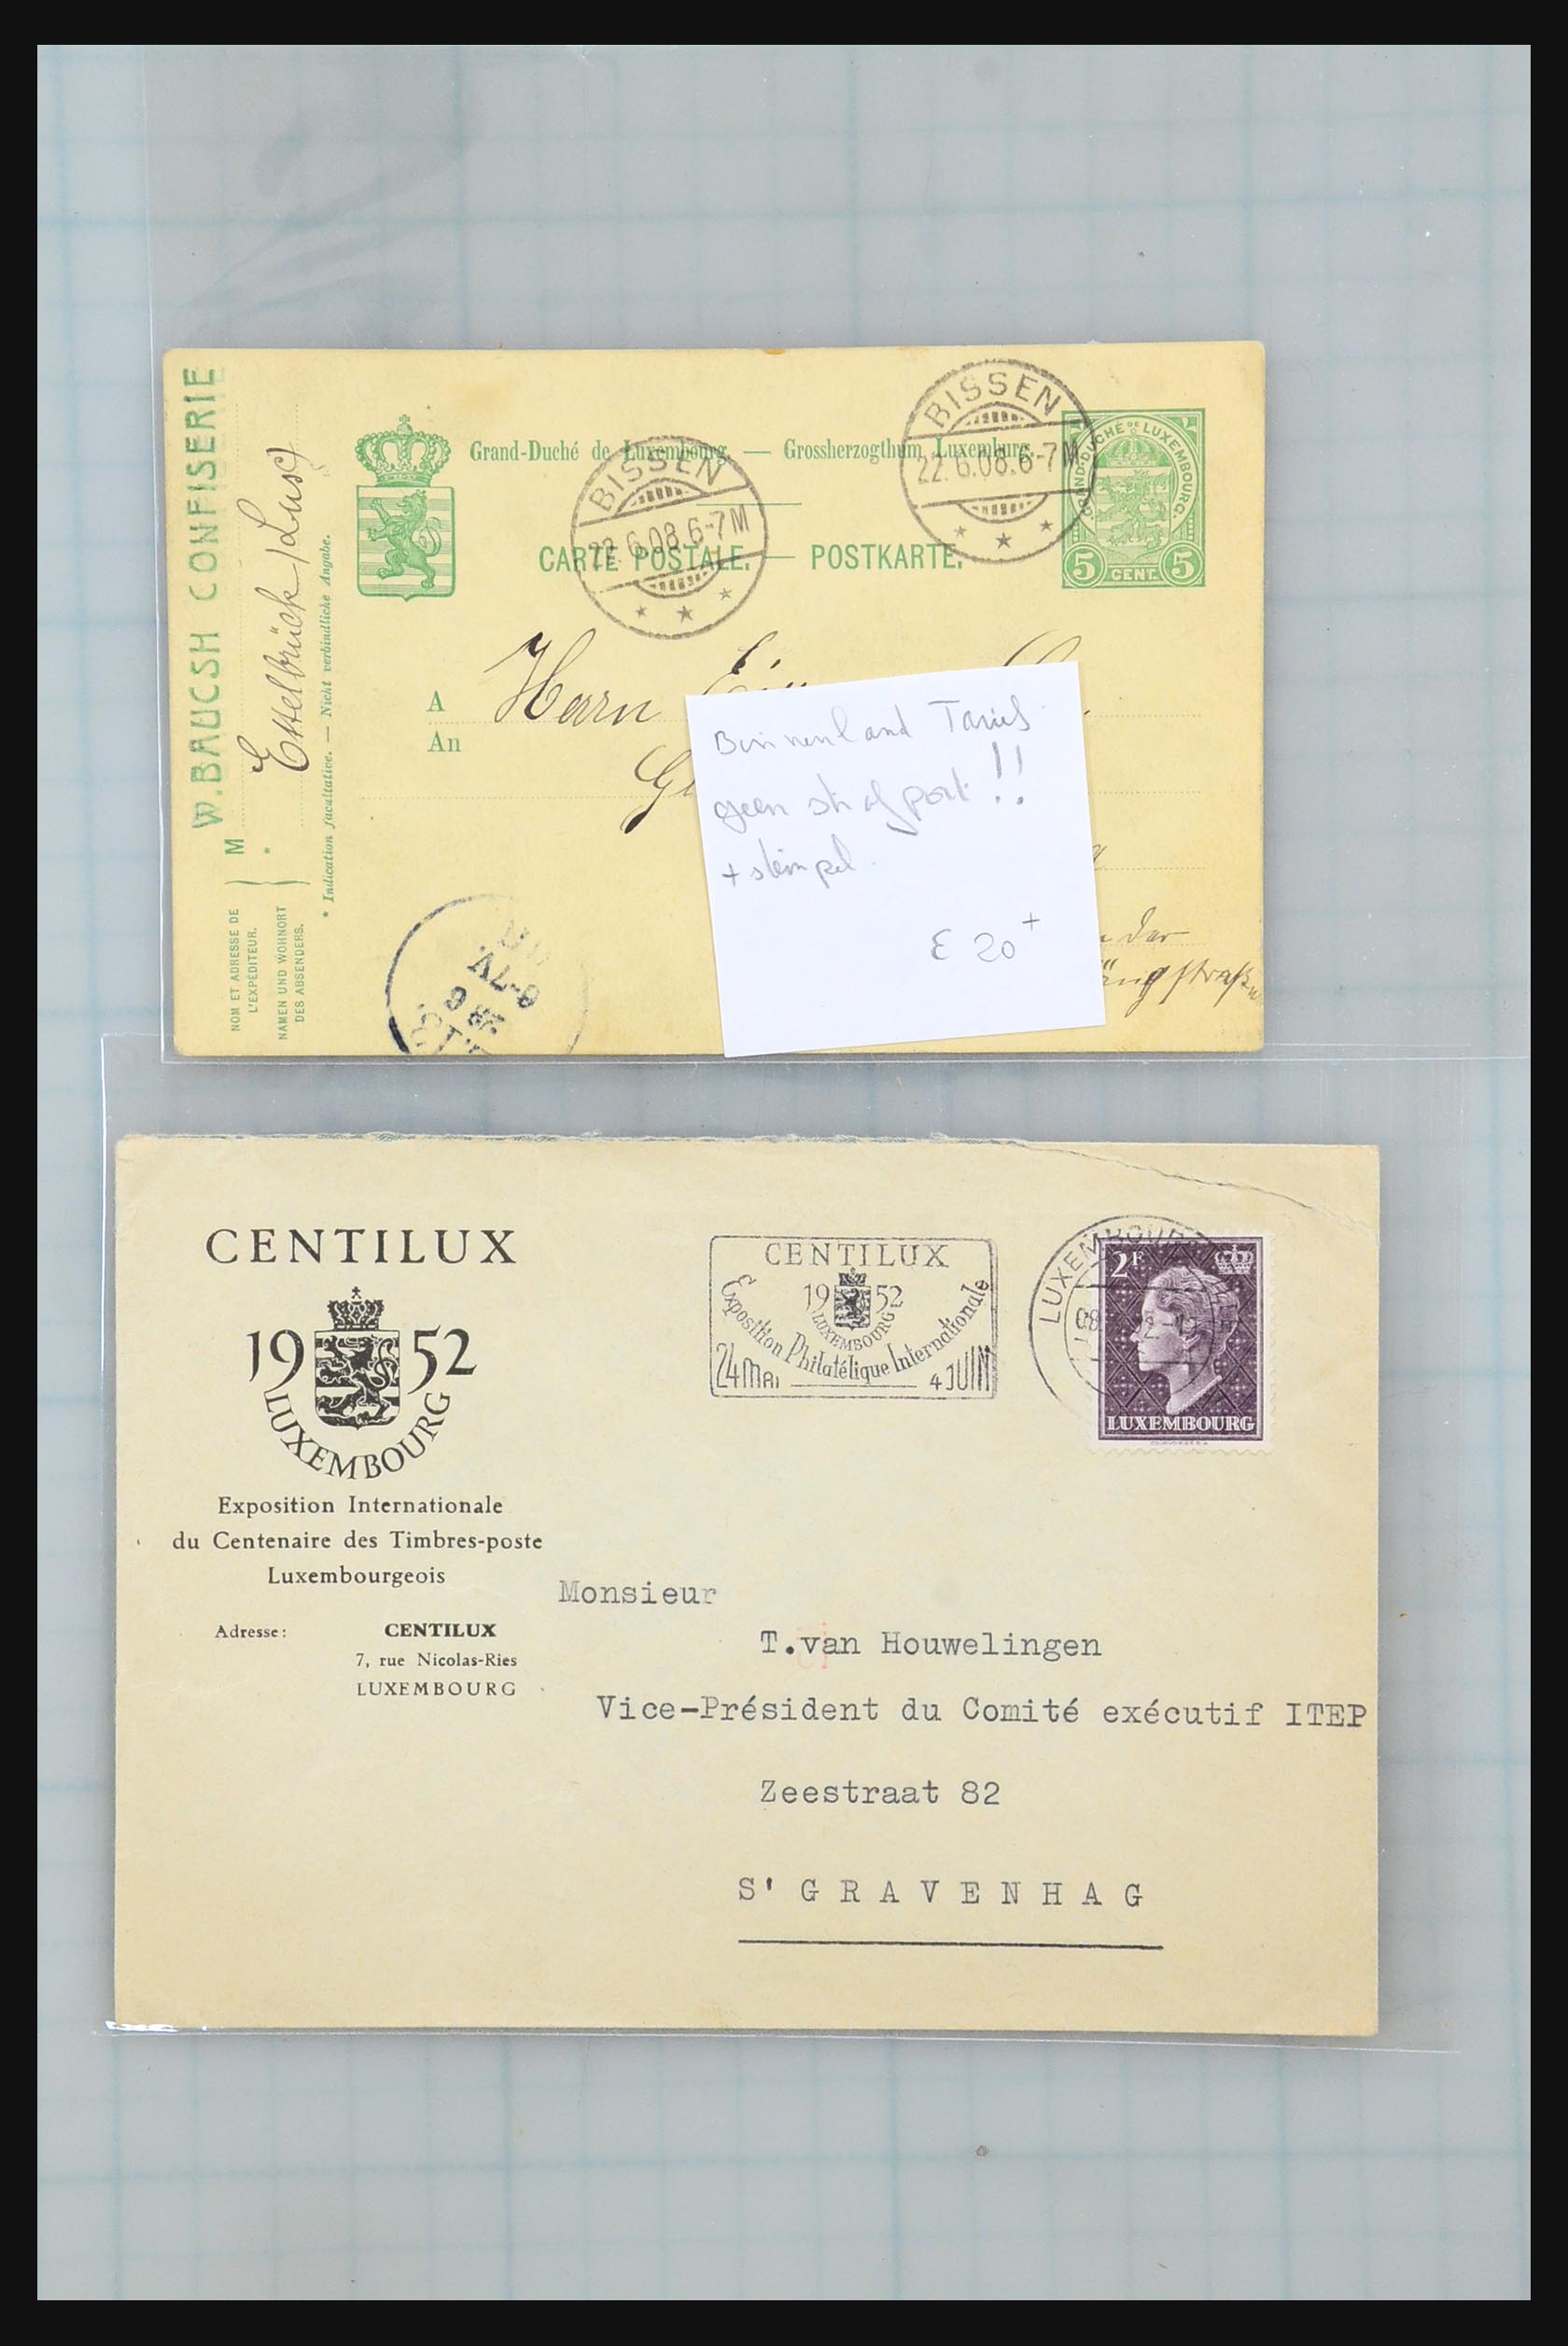 31358 072 - 31358 Portugal/Luxemburg/Greece covers 1880-1960.